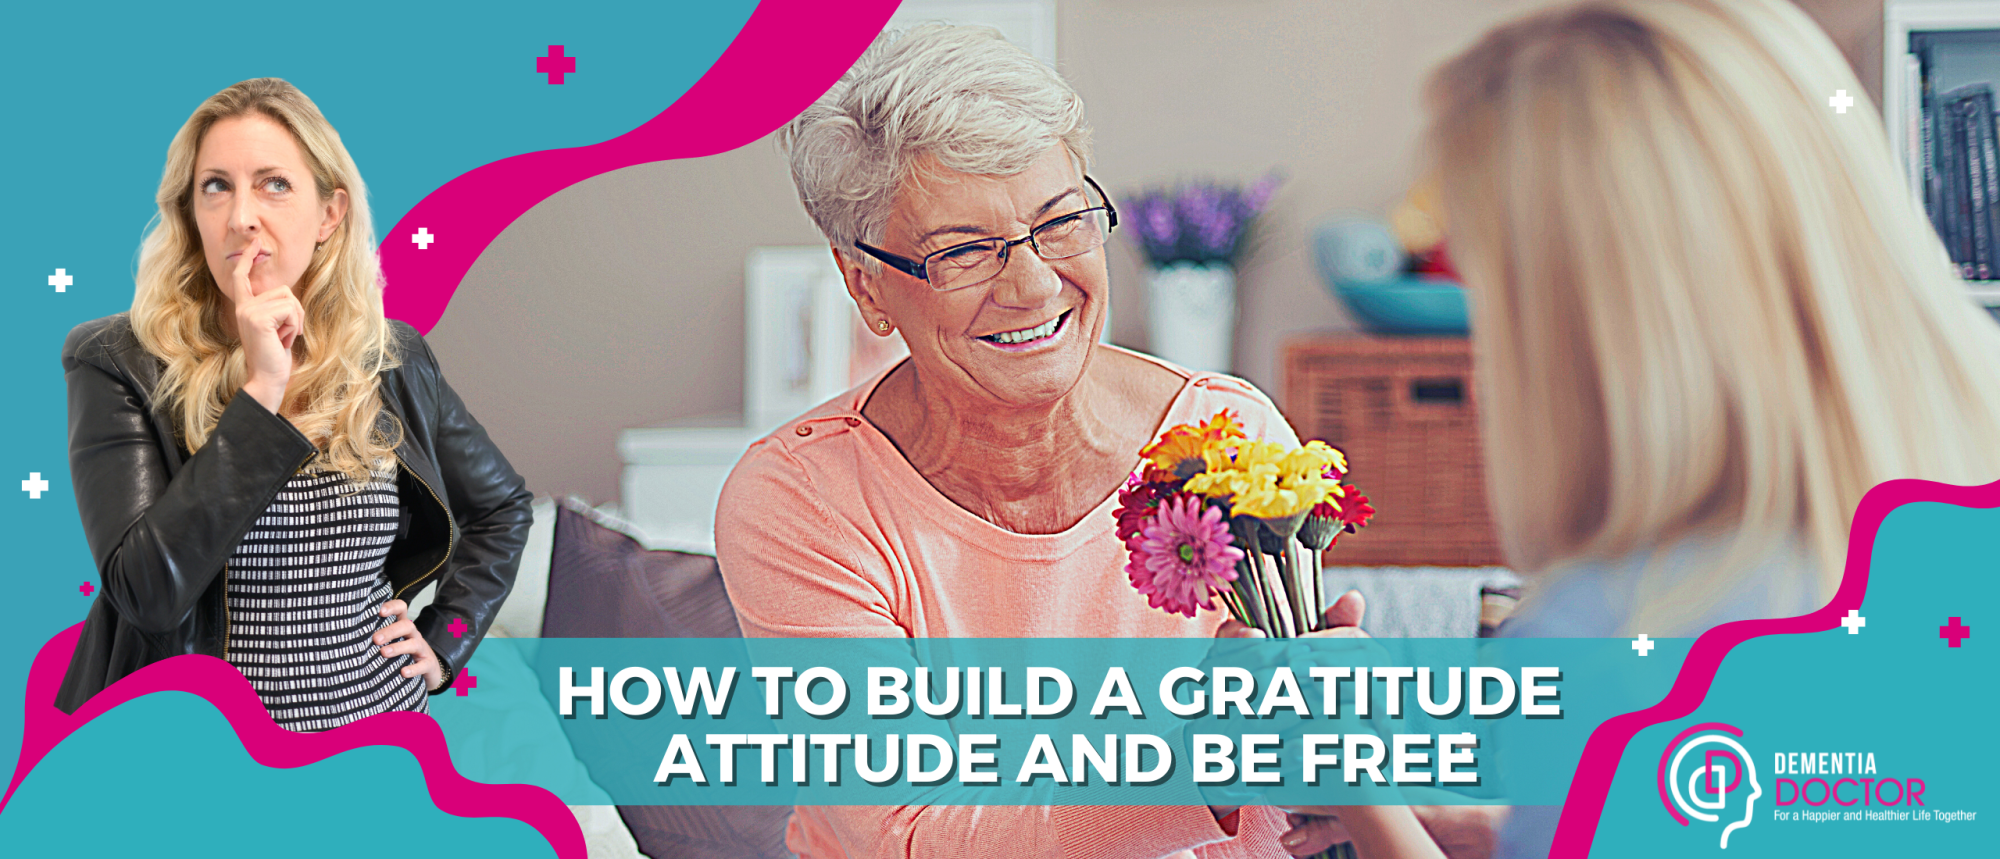 Blog How to build a gratitude attitude and be free right now